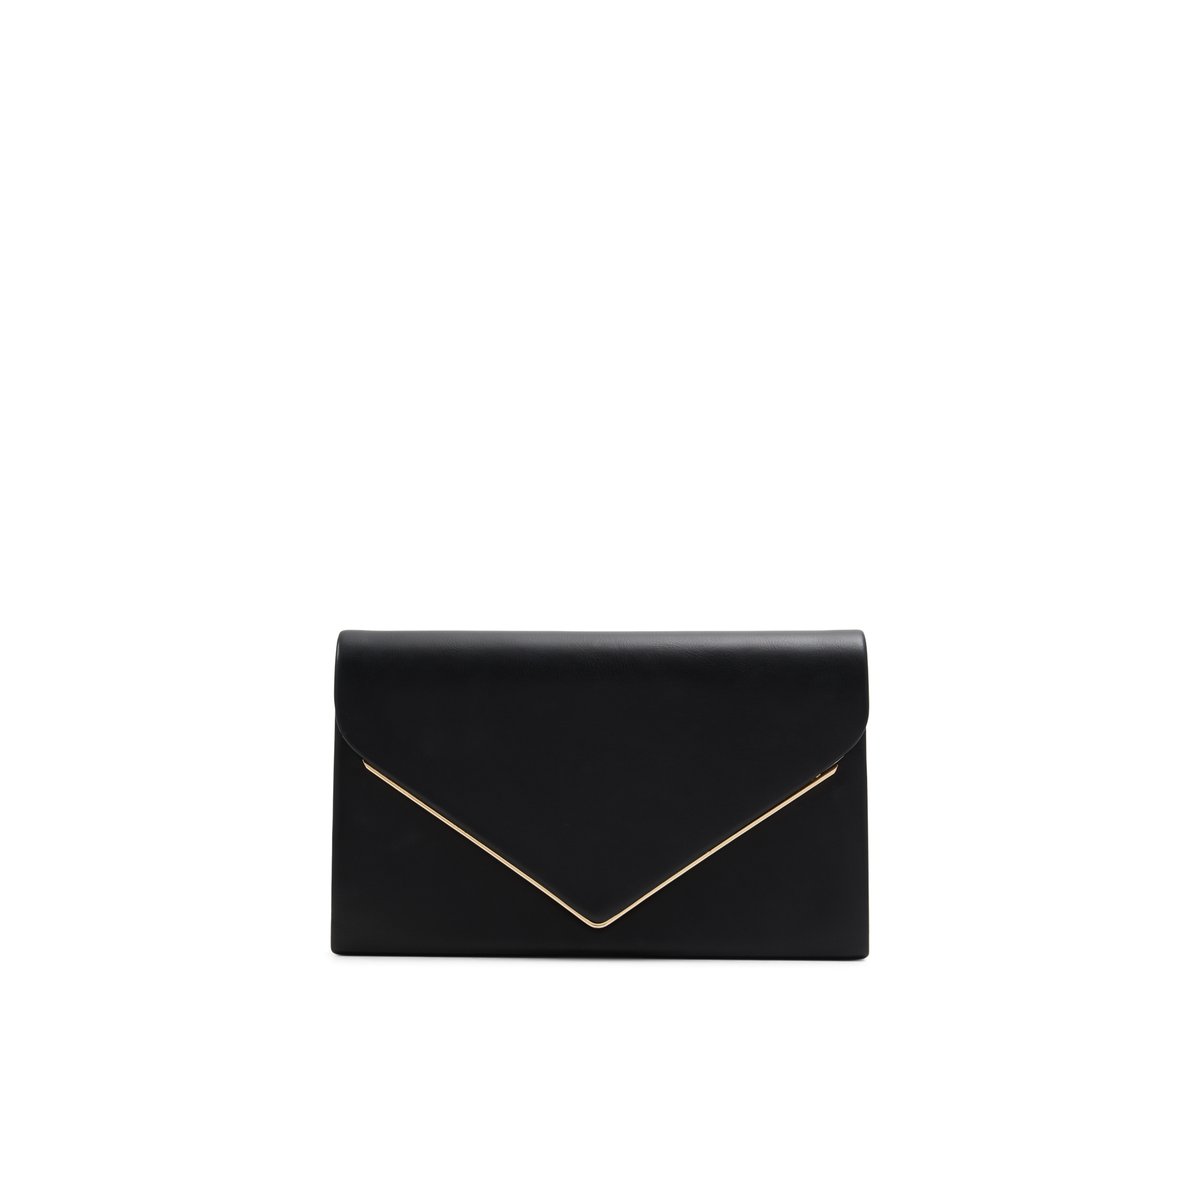 Qweenbee Oxford Women's Clutches | Call It Spring Canada